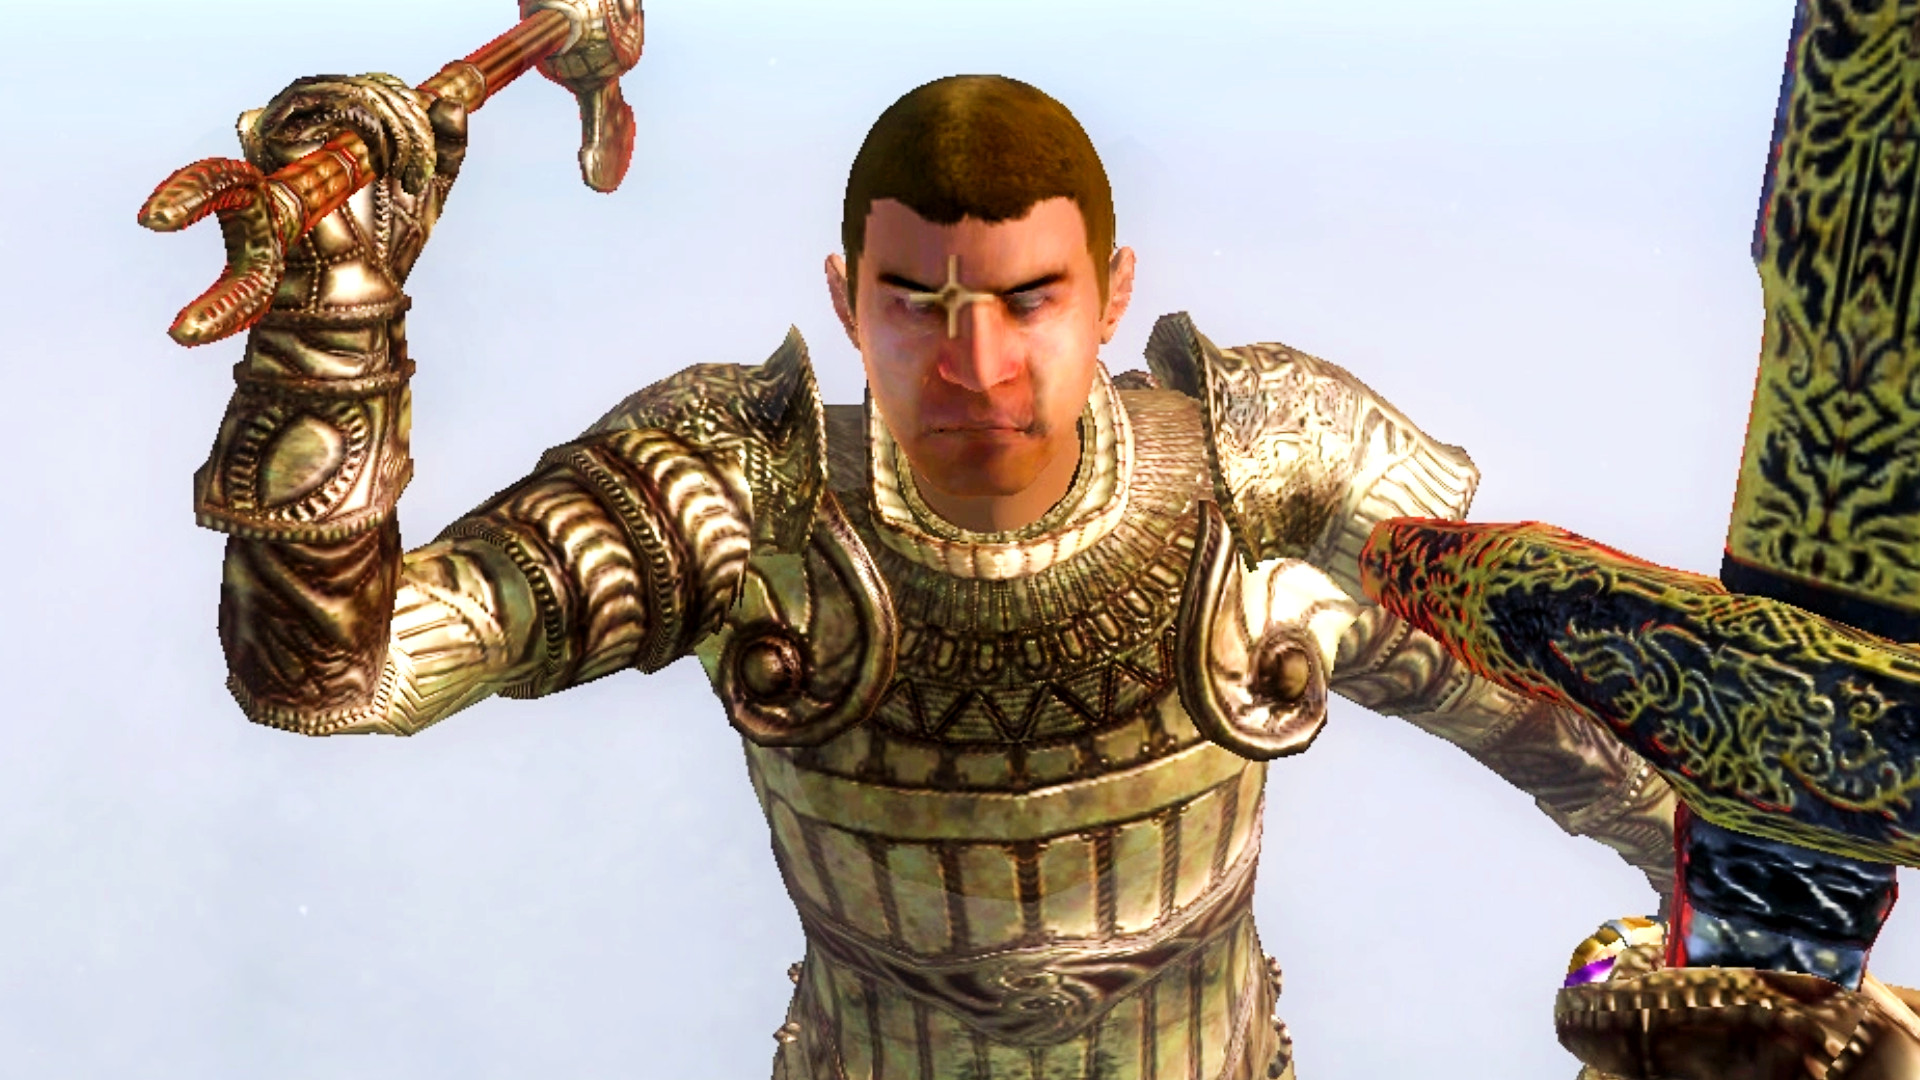 Put Skyrim mods aside as Oblivion and Morrowind collide in new project